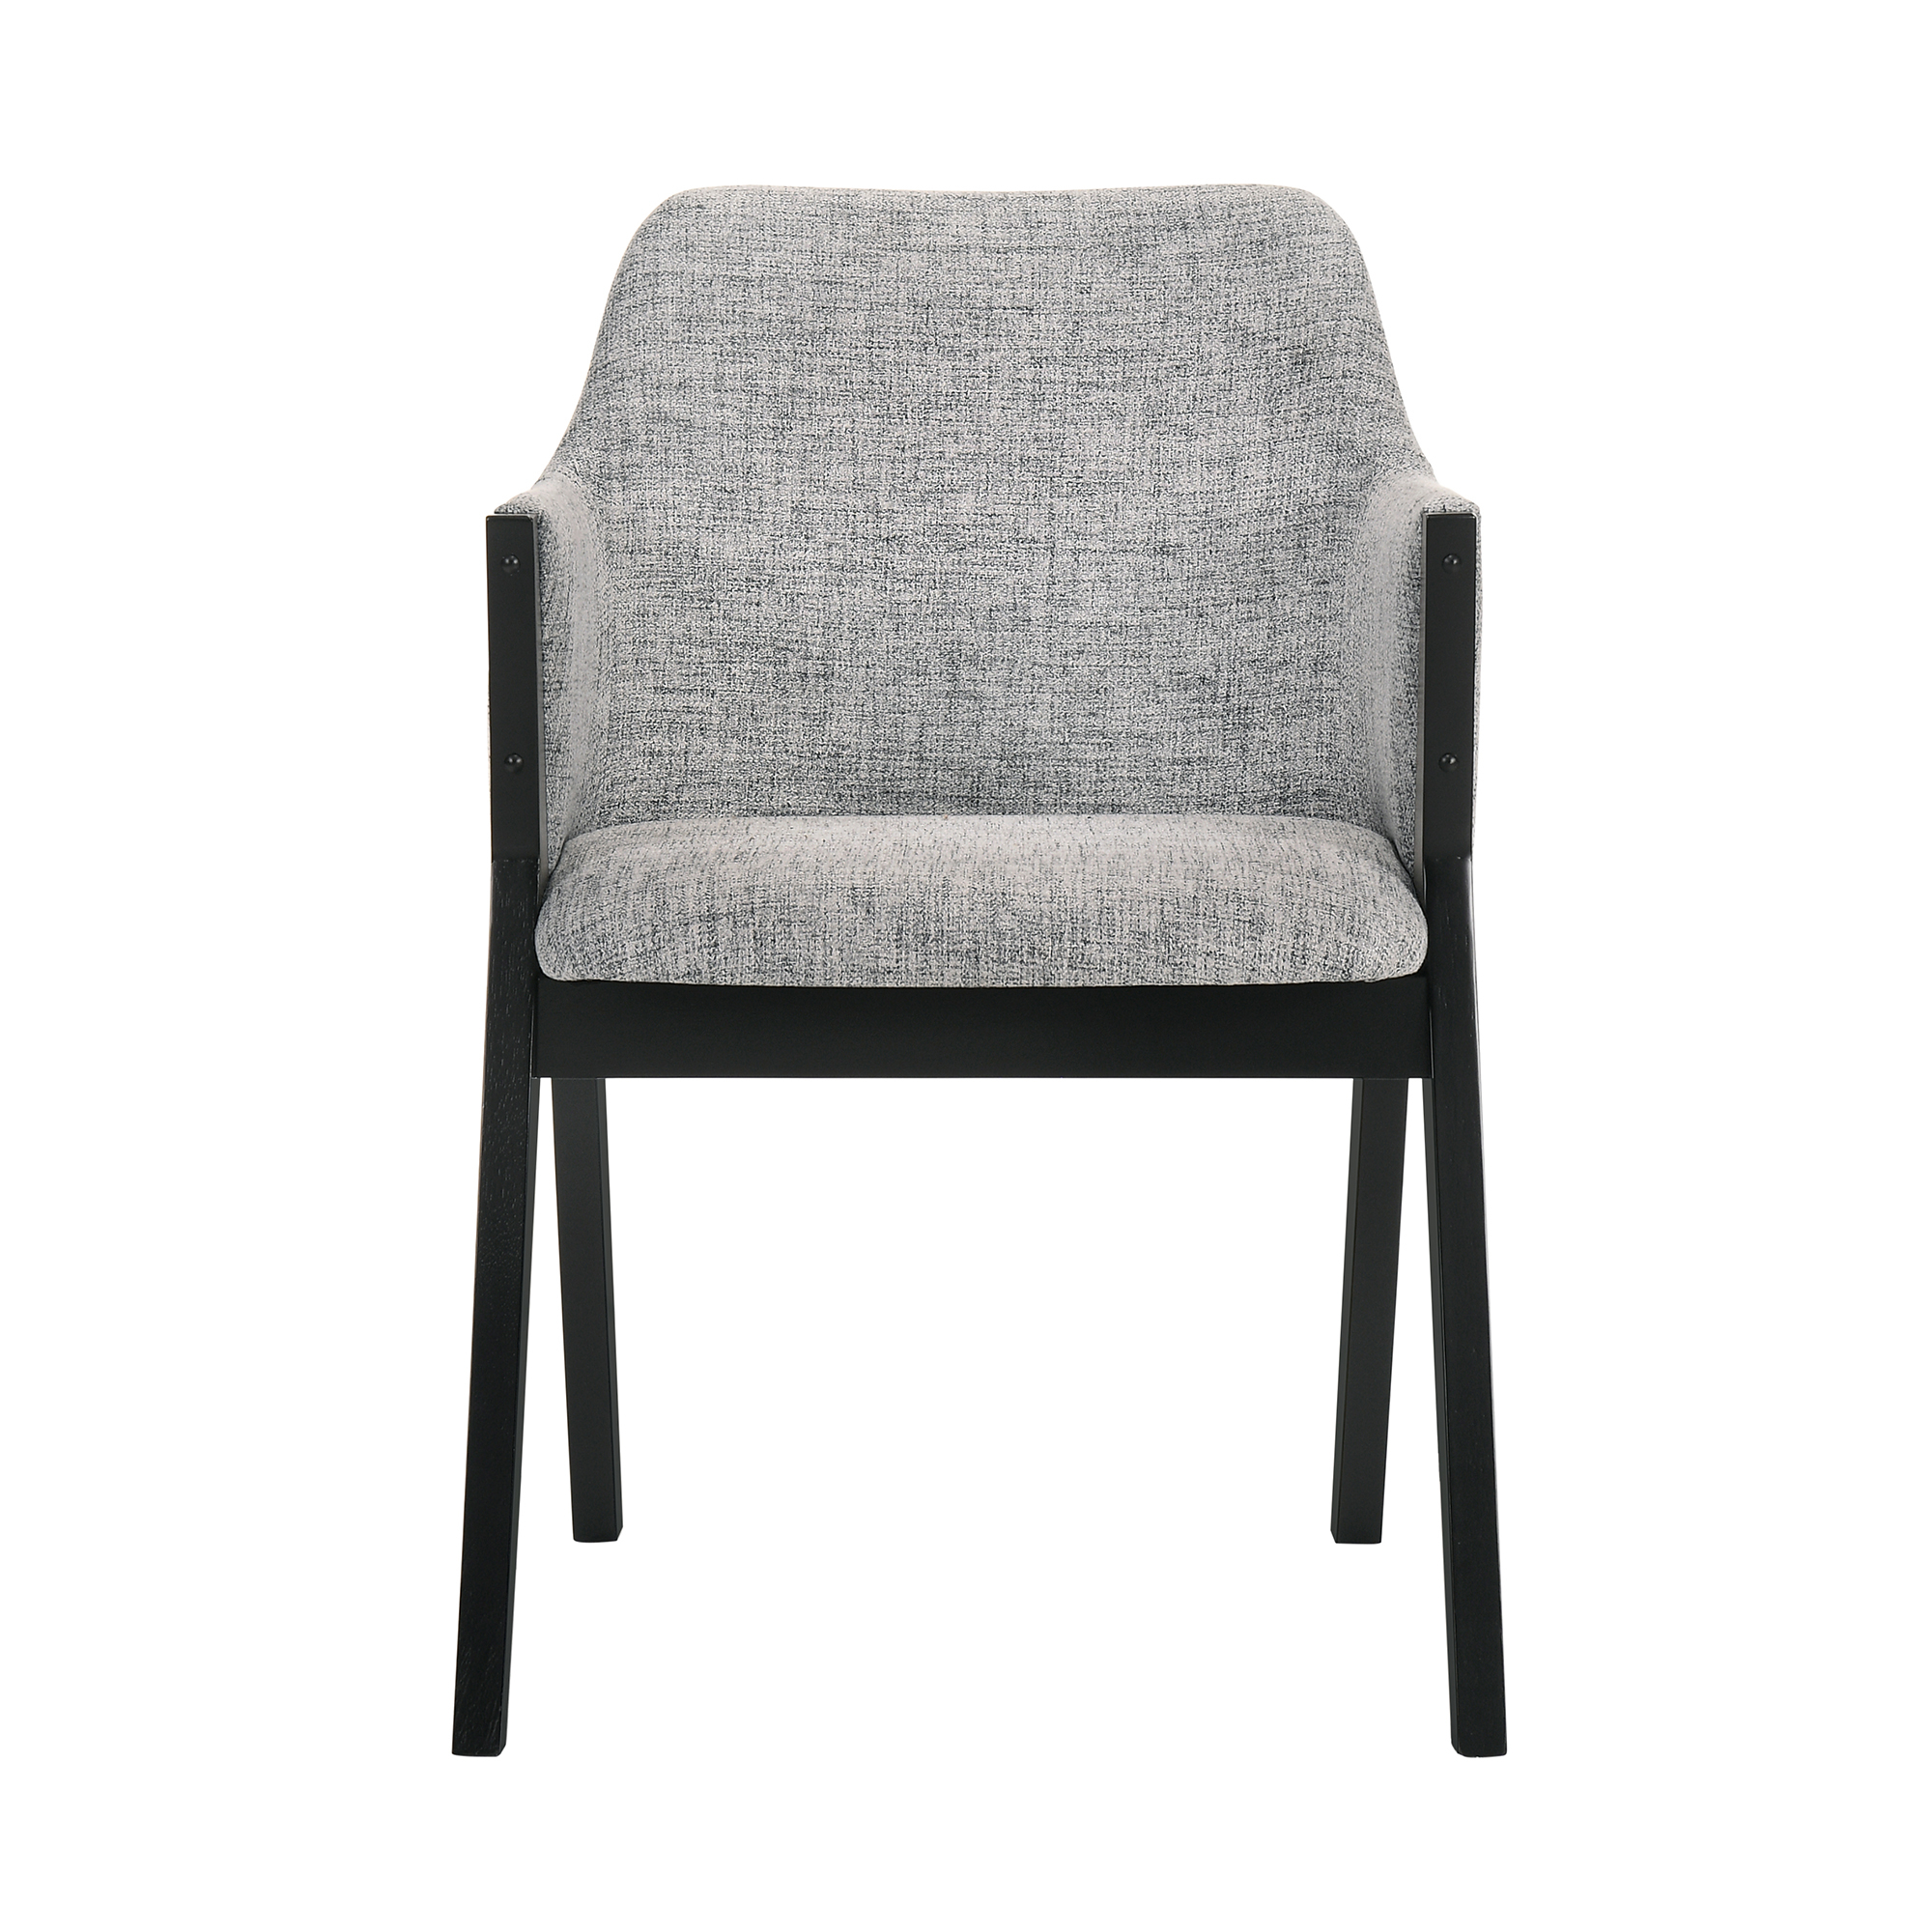 5 Piece Dining Set With Fabric Side Chairs And Angled Legs, Gray And Black- Saltoro Sherpi